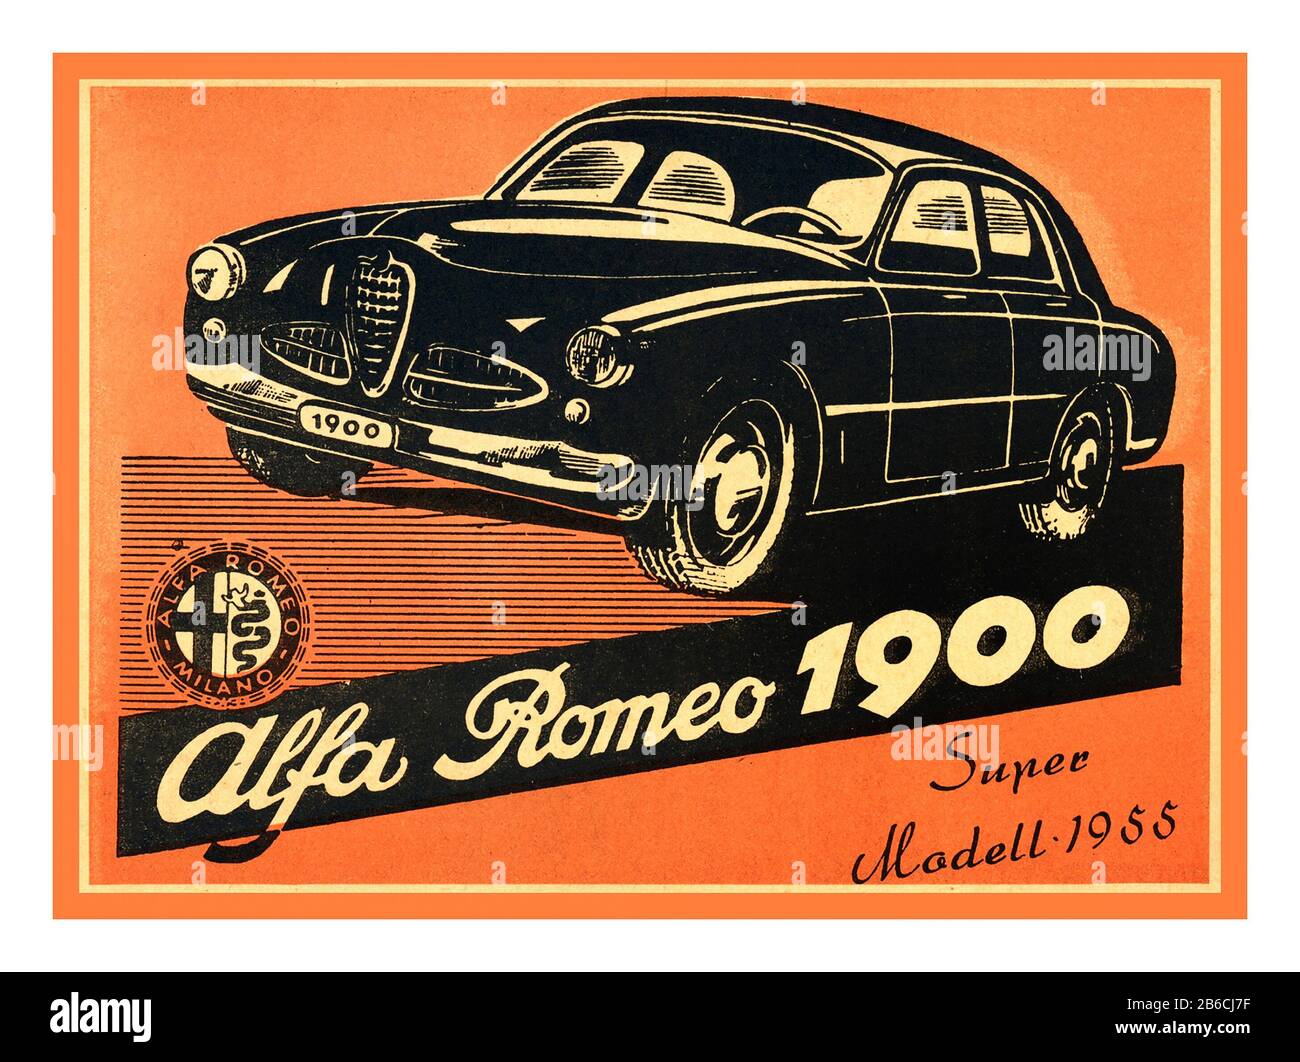 Vintage 1955 Alfa Romeo 1900  Super Modell 1955 Italian Berlina 4 door Sports Motorcar The Alfa Romeo 1900 is an automobile produced by Italian car manufacturer Alfa Romeo from 1950 to 1959. Designed by Orazio Satta, it was an important development for Alfa Romeo as the marque's first car built entirely on a production line and first production car without a separate chassis. It was also the first Alfa Romeo offered with left-hand drive The car was introduced at the 1950 Paris Motor Show Stock Photo